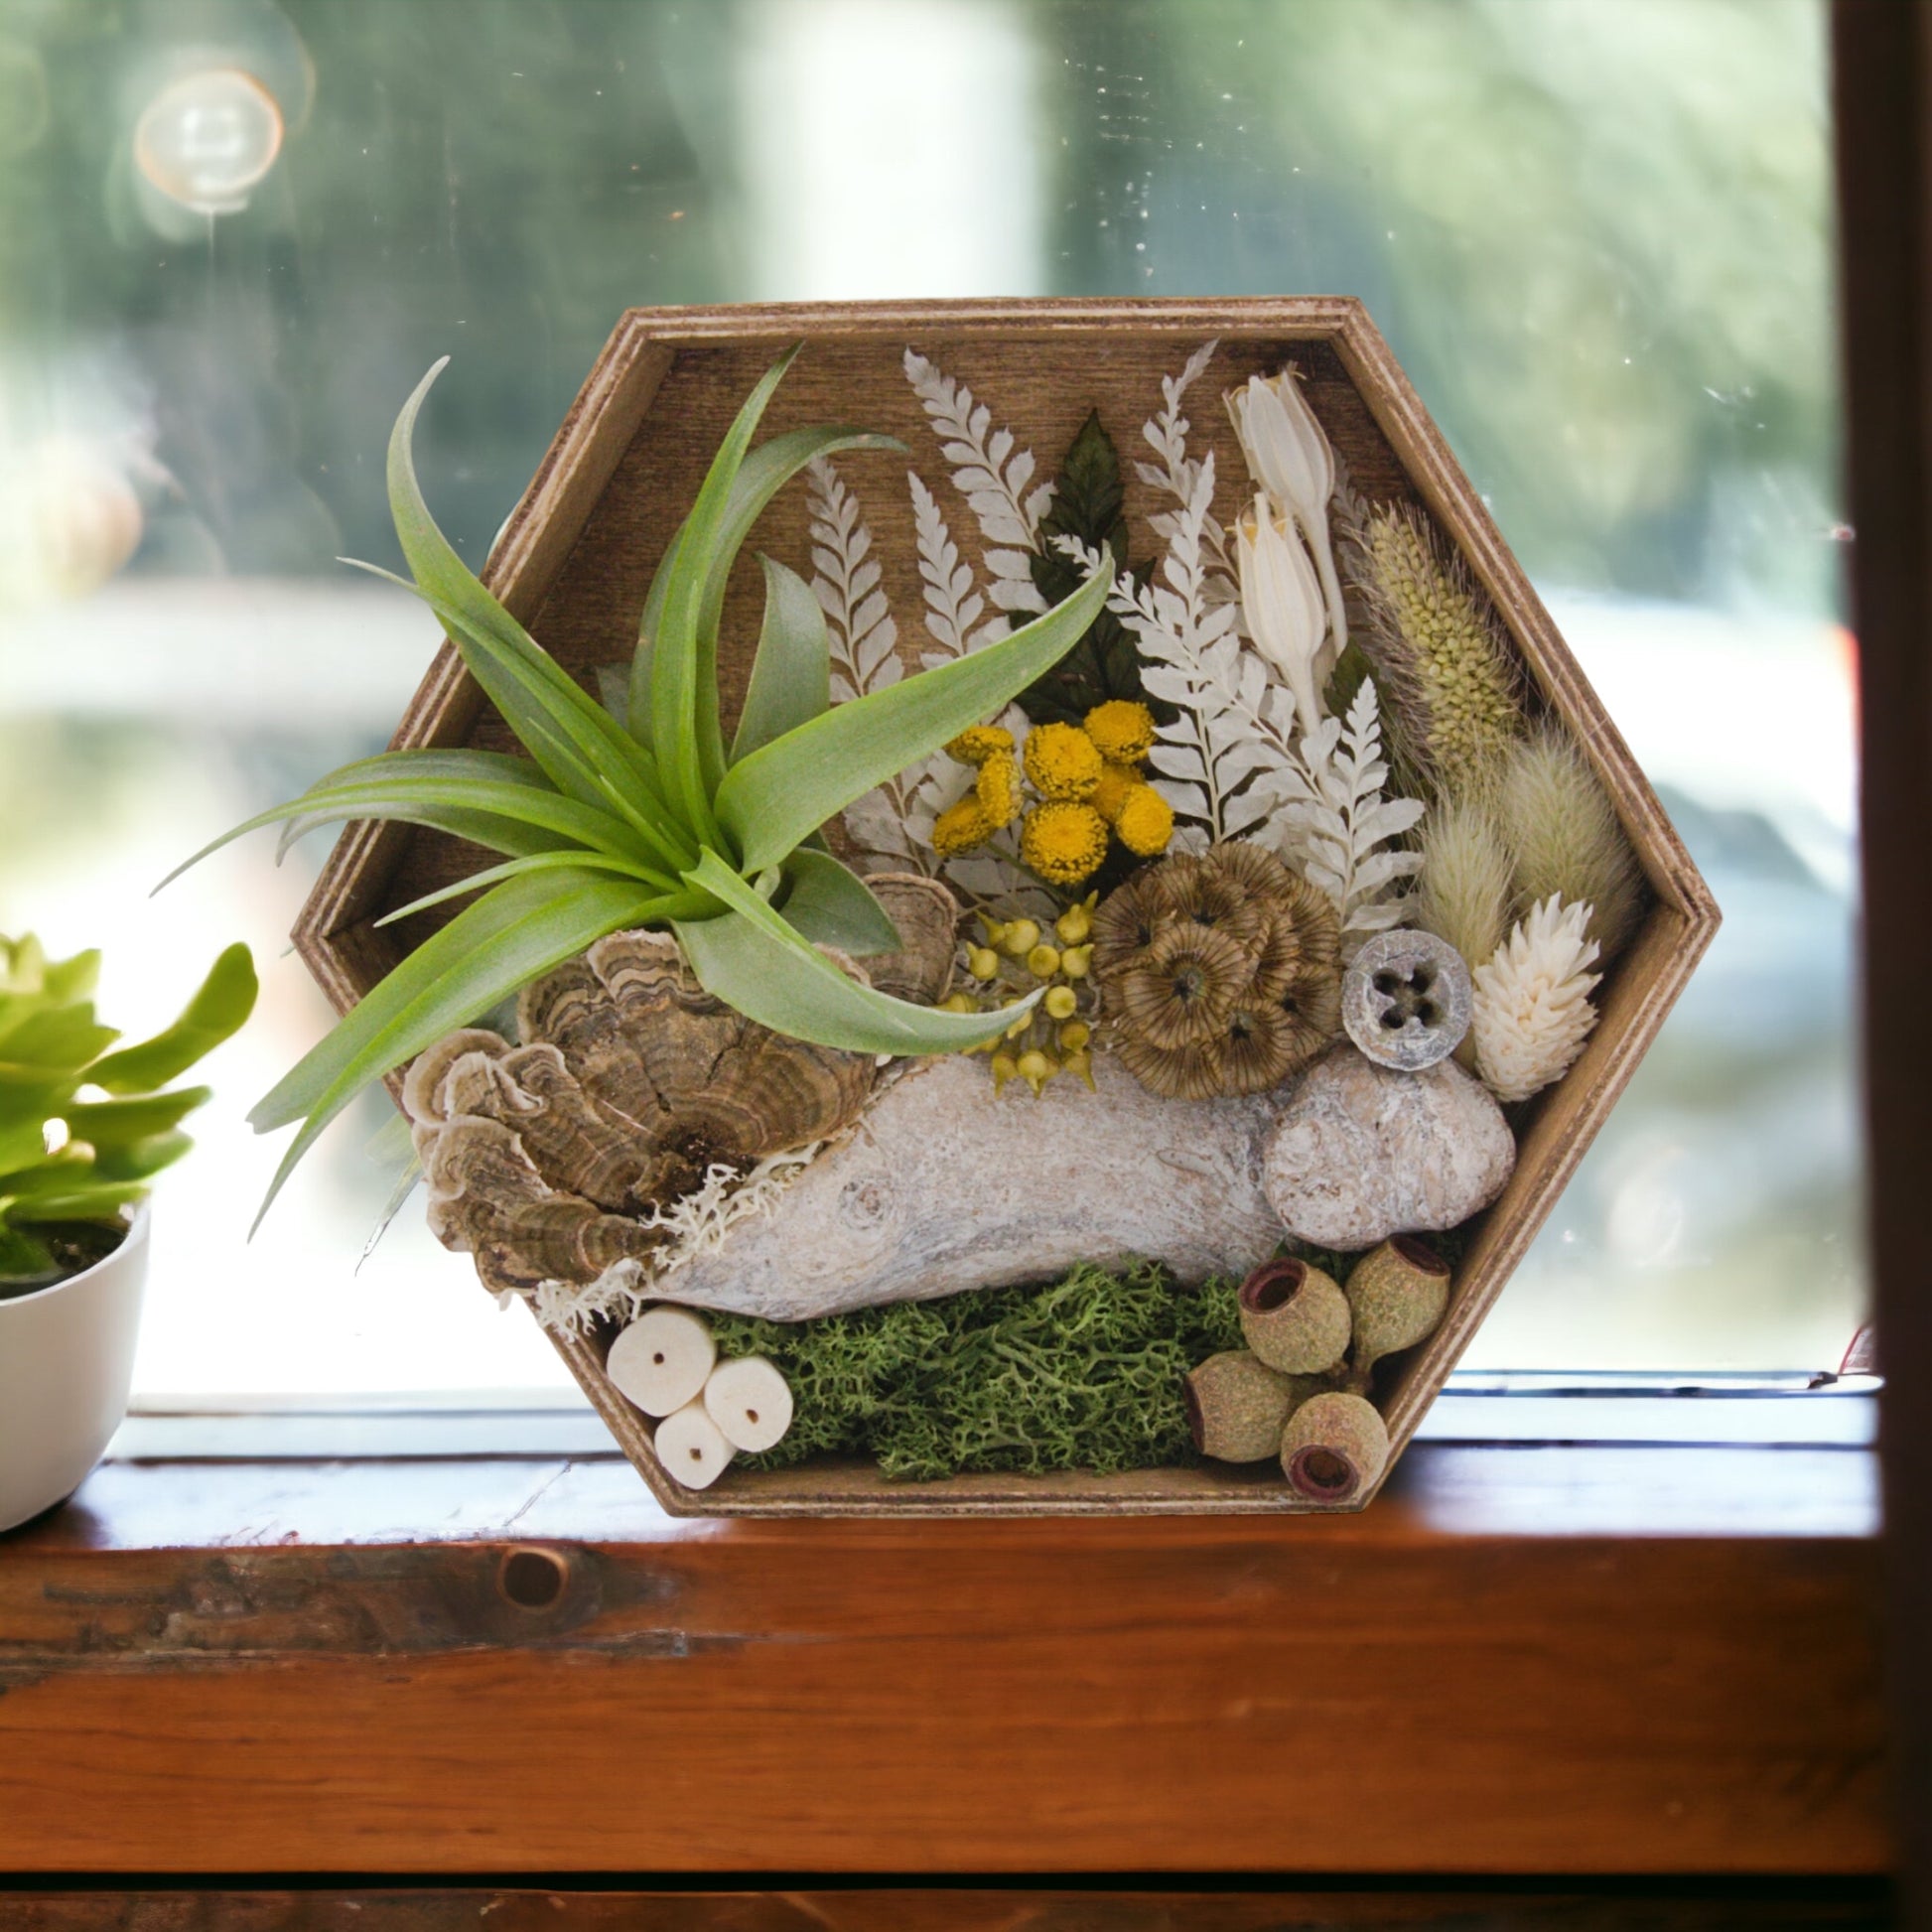 Wooden hexagon box frame stained, filled with dried flowers, moss, wood, dried mushrooms and an airplant